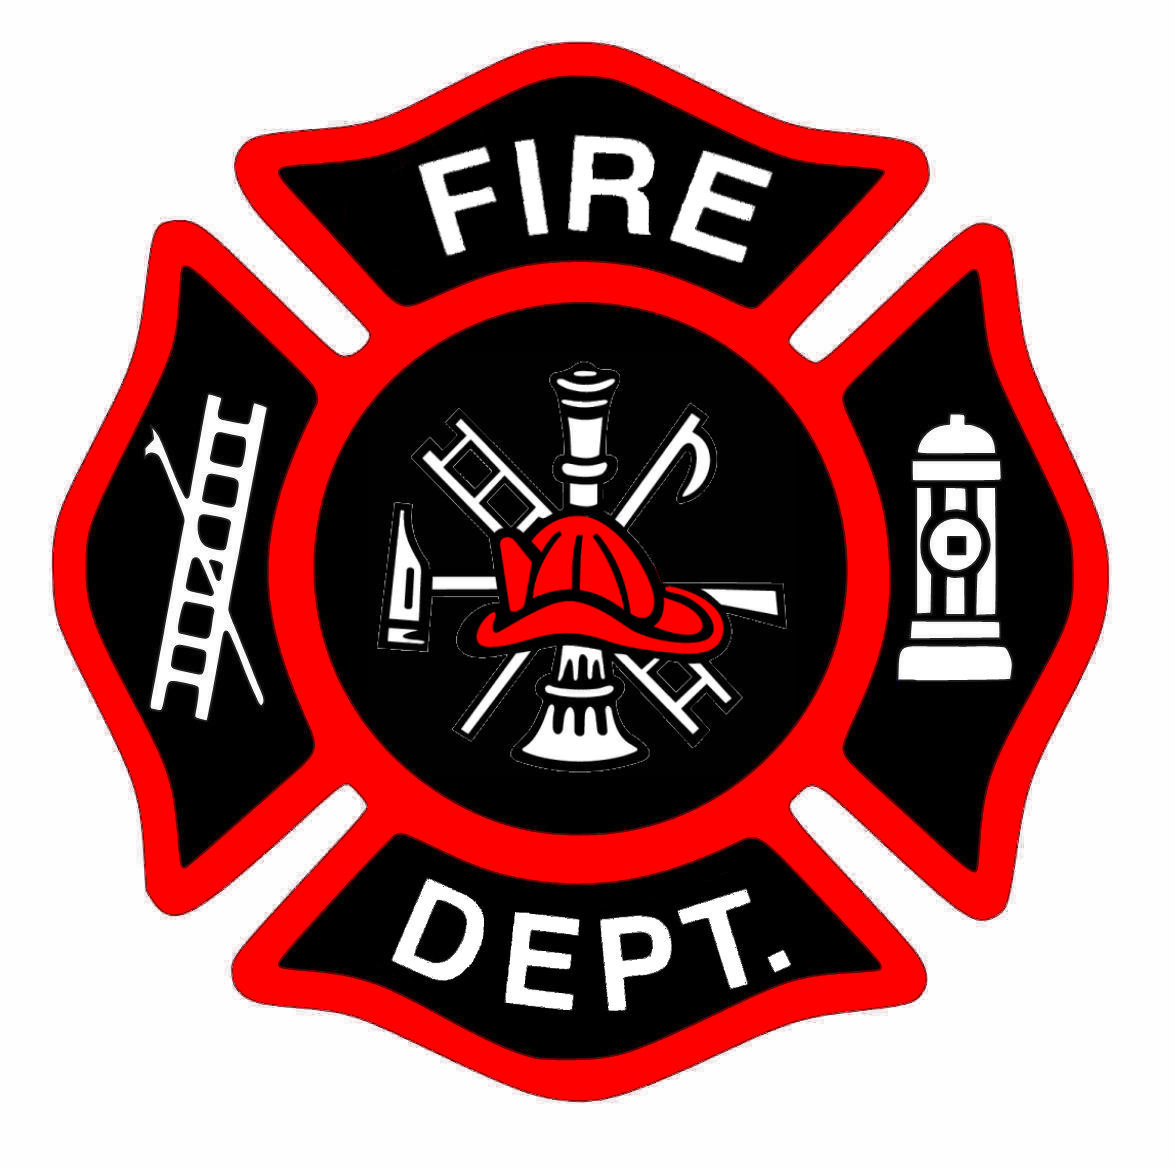 Fireman bage new red. Park clipart badge